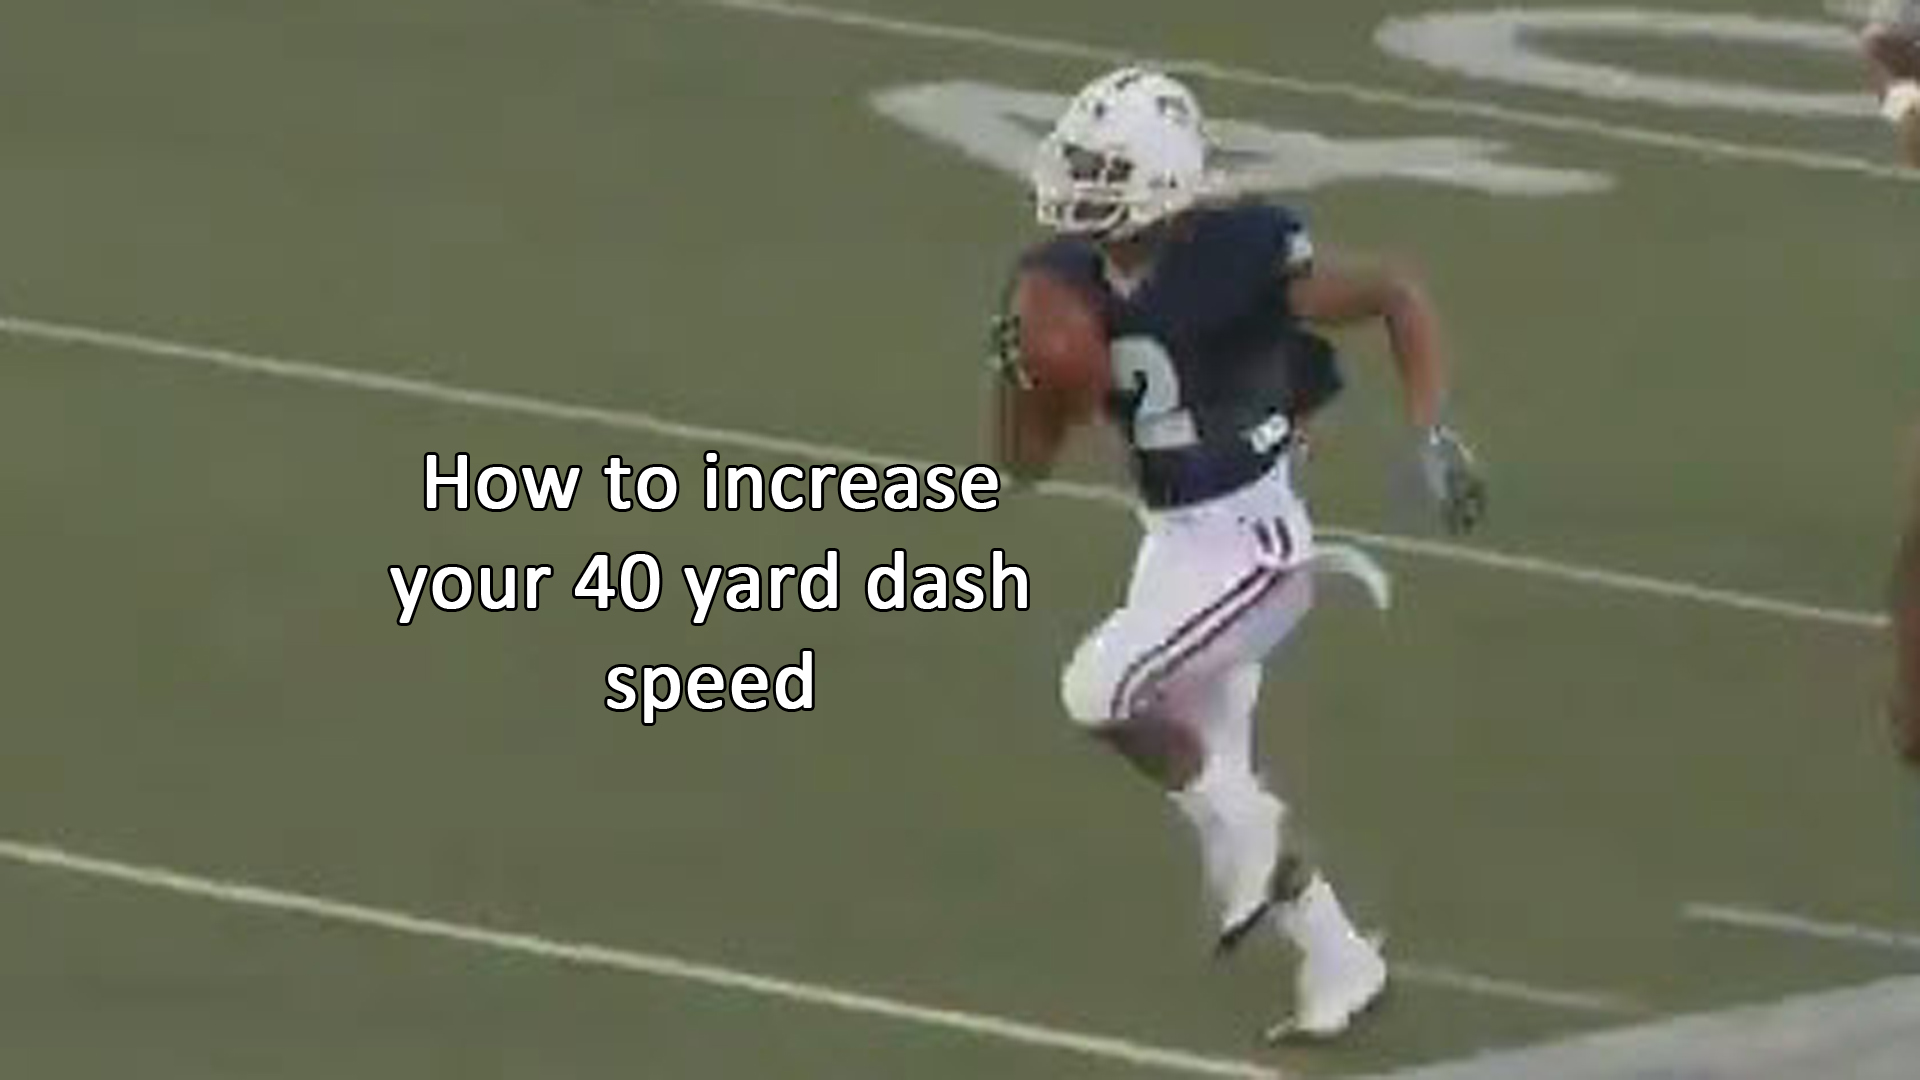 Improve Your 40 Speed by Increasing Your Running Stride & Turnover Rate